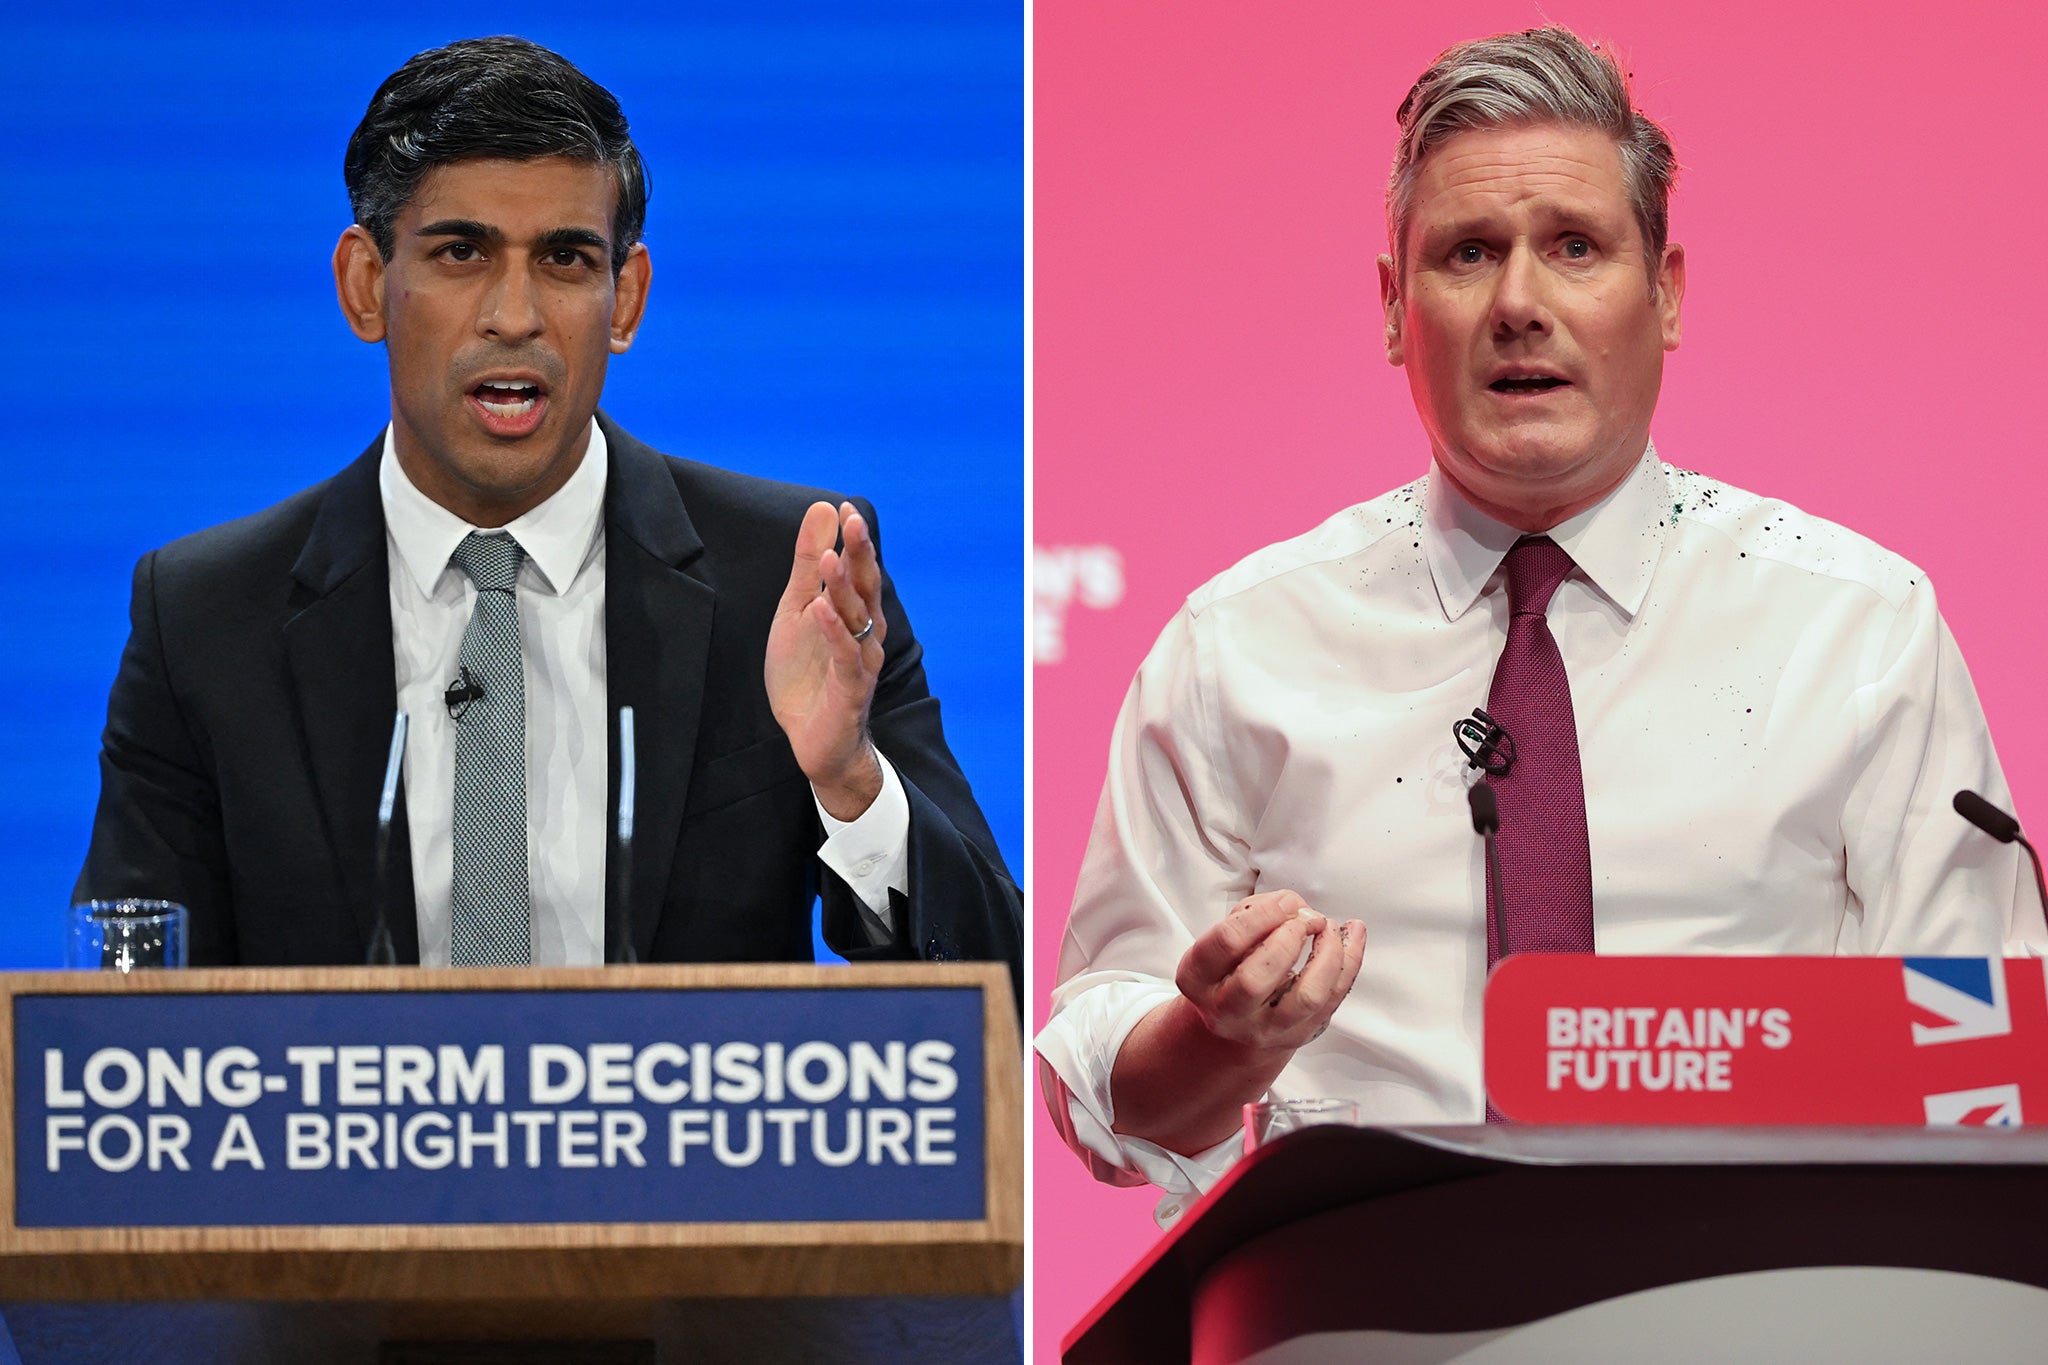 The two contrasting conferences showed that, even when covered in glitter, Labour outshines the Conservatives